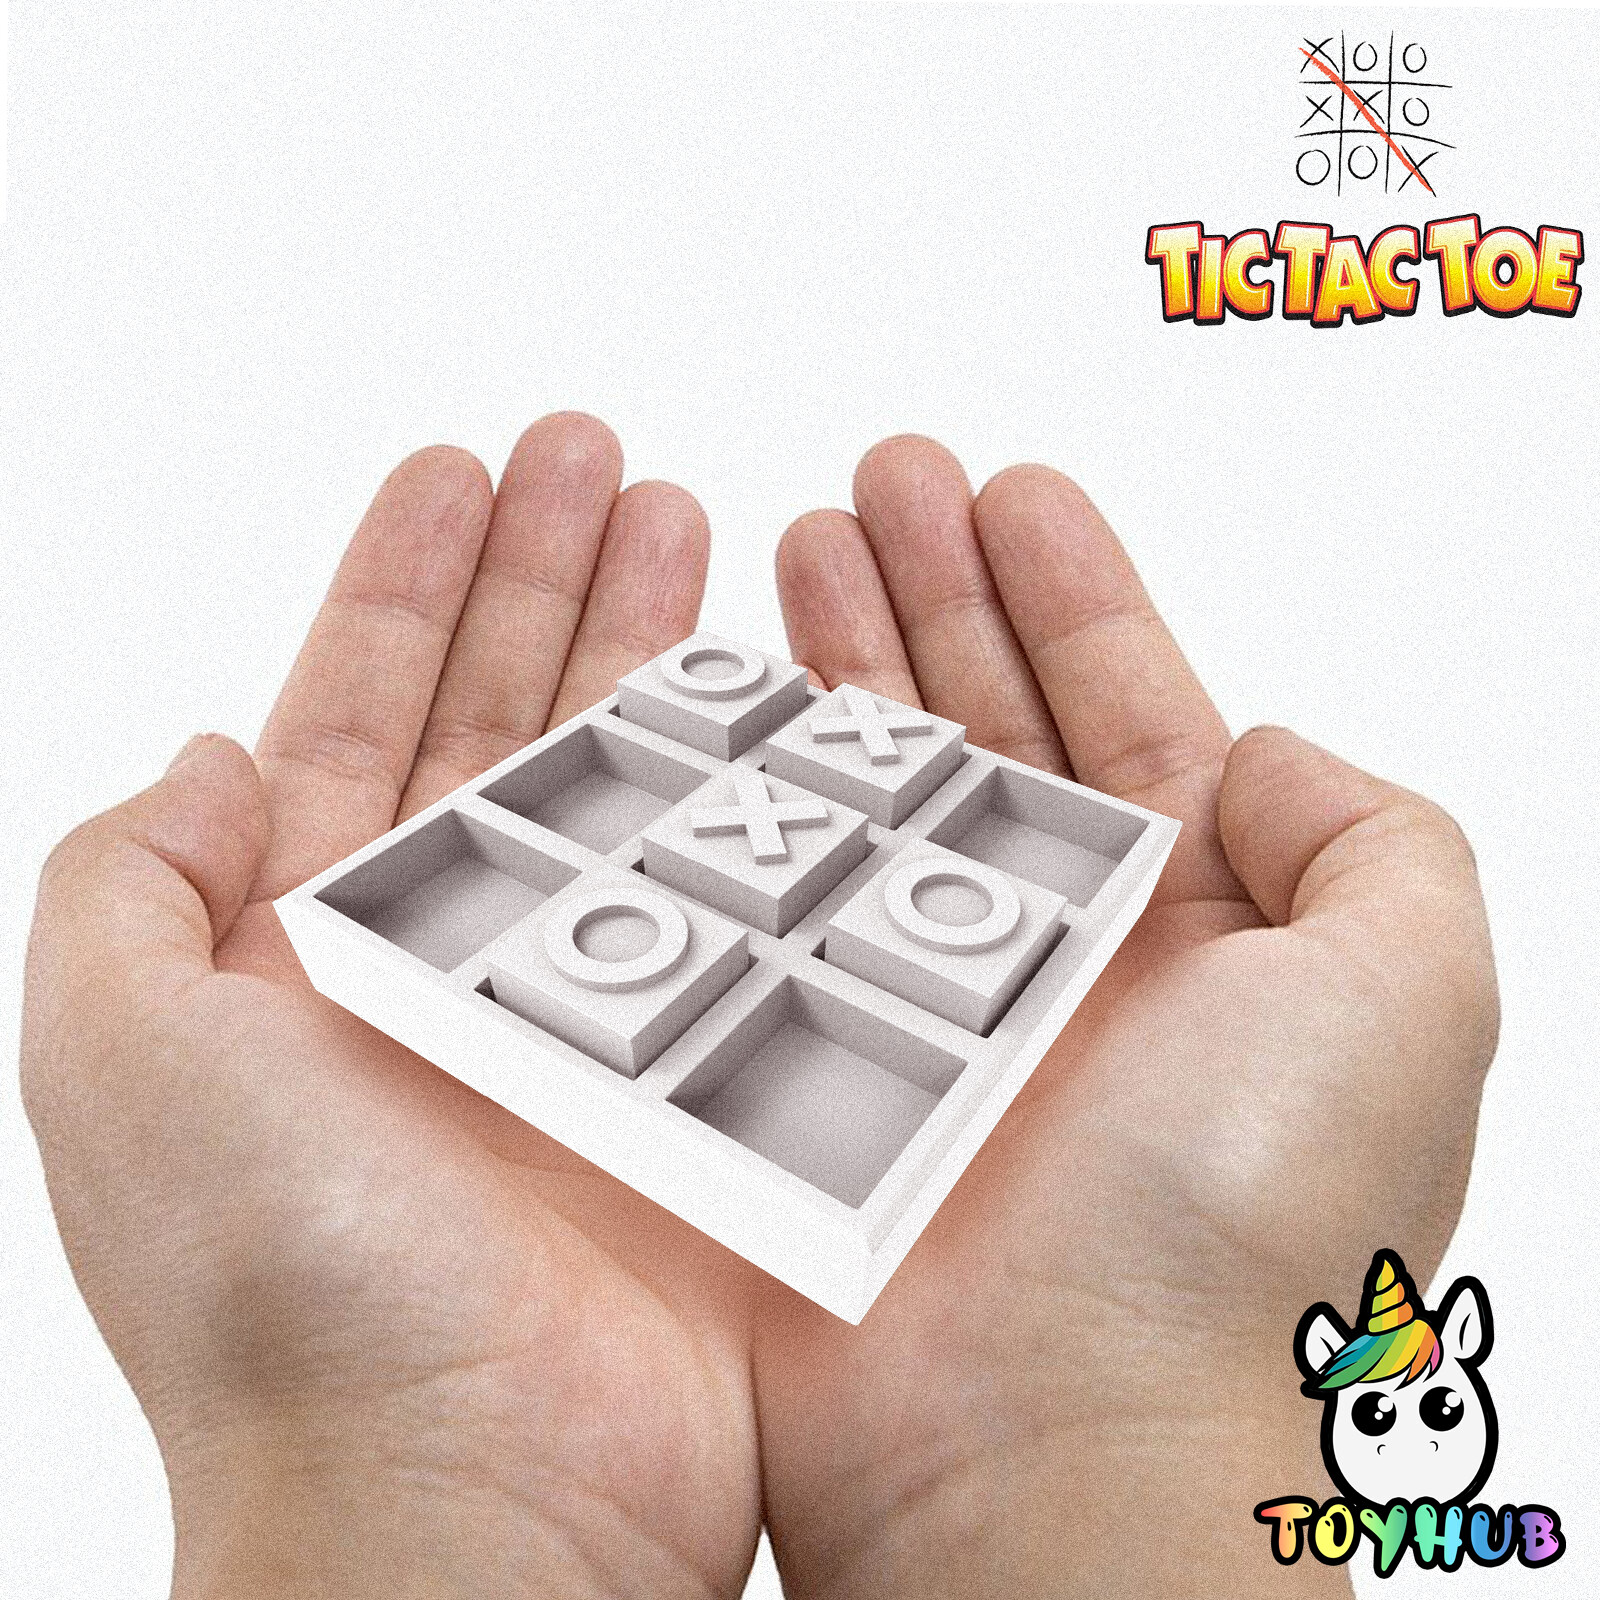 Tic-Tac Two, Board Game